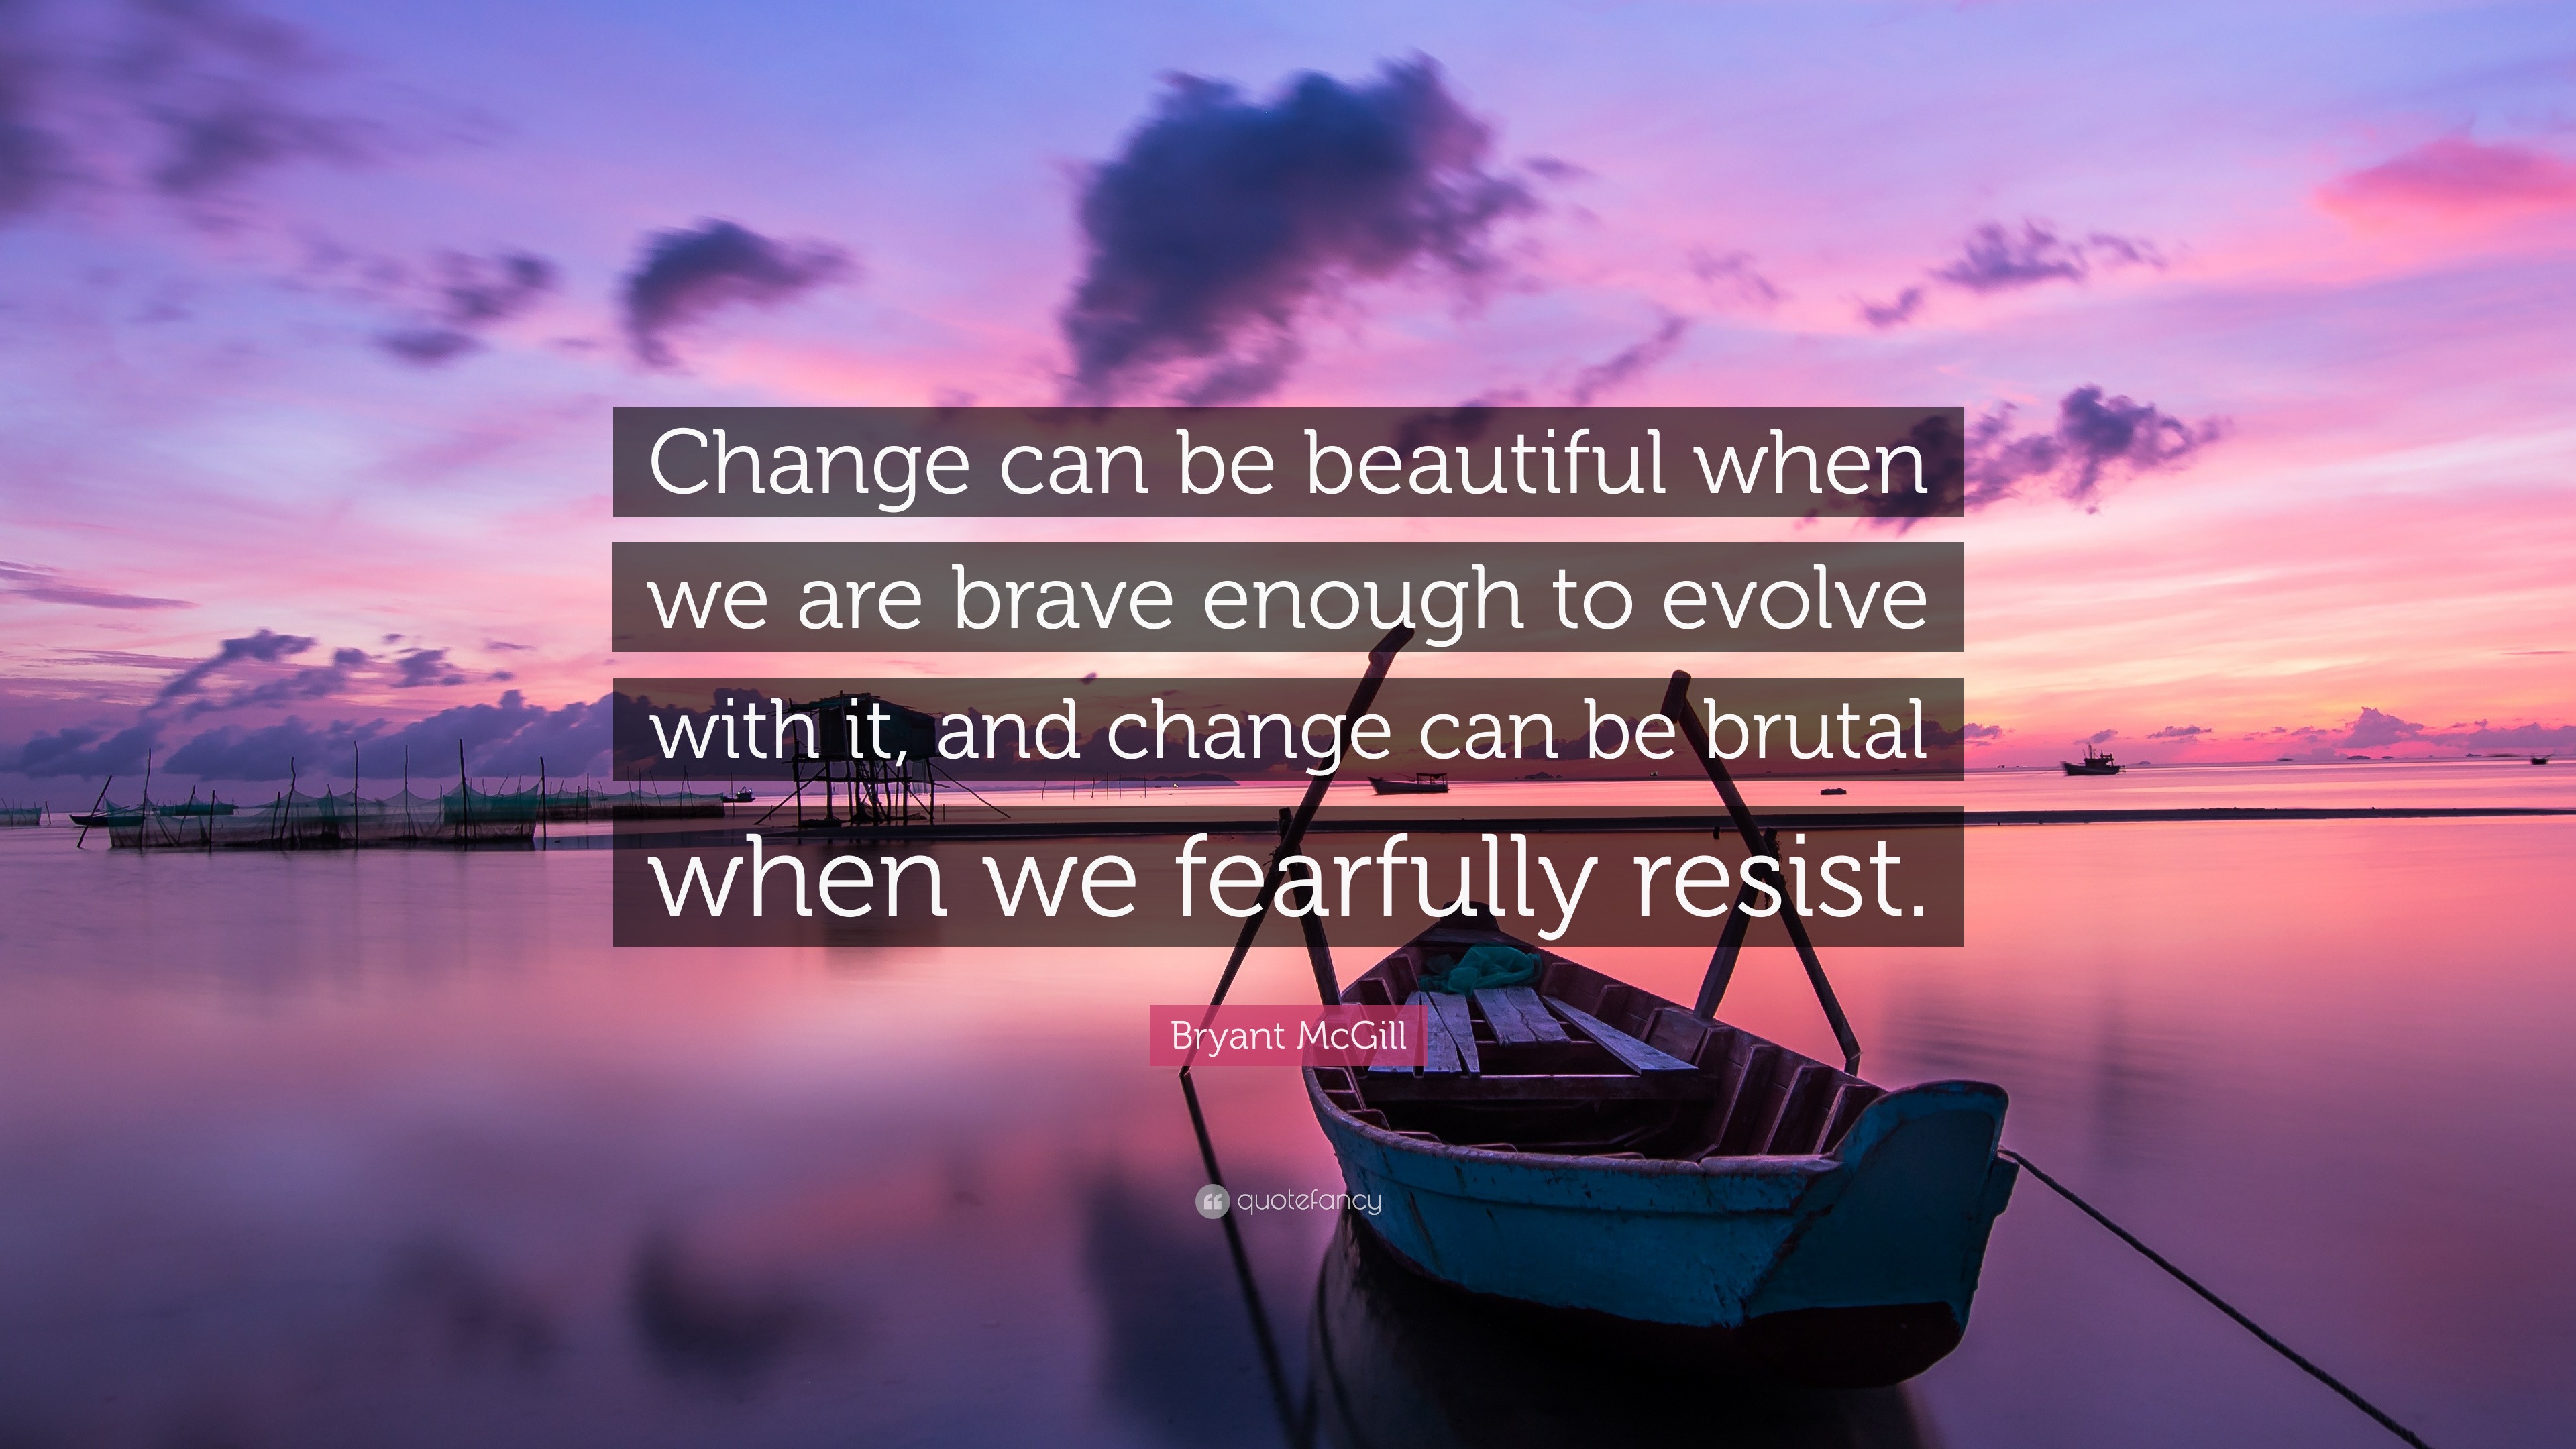 Bryant McGill Quote: “Change can be beautiful when we are brave enough